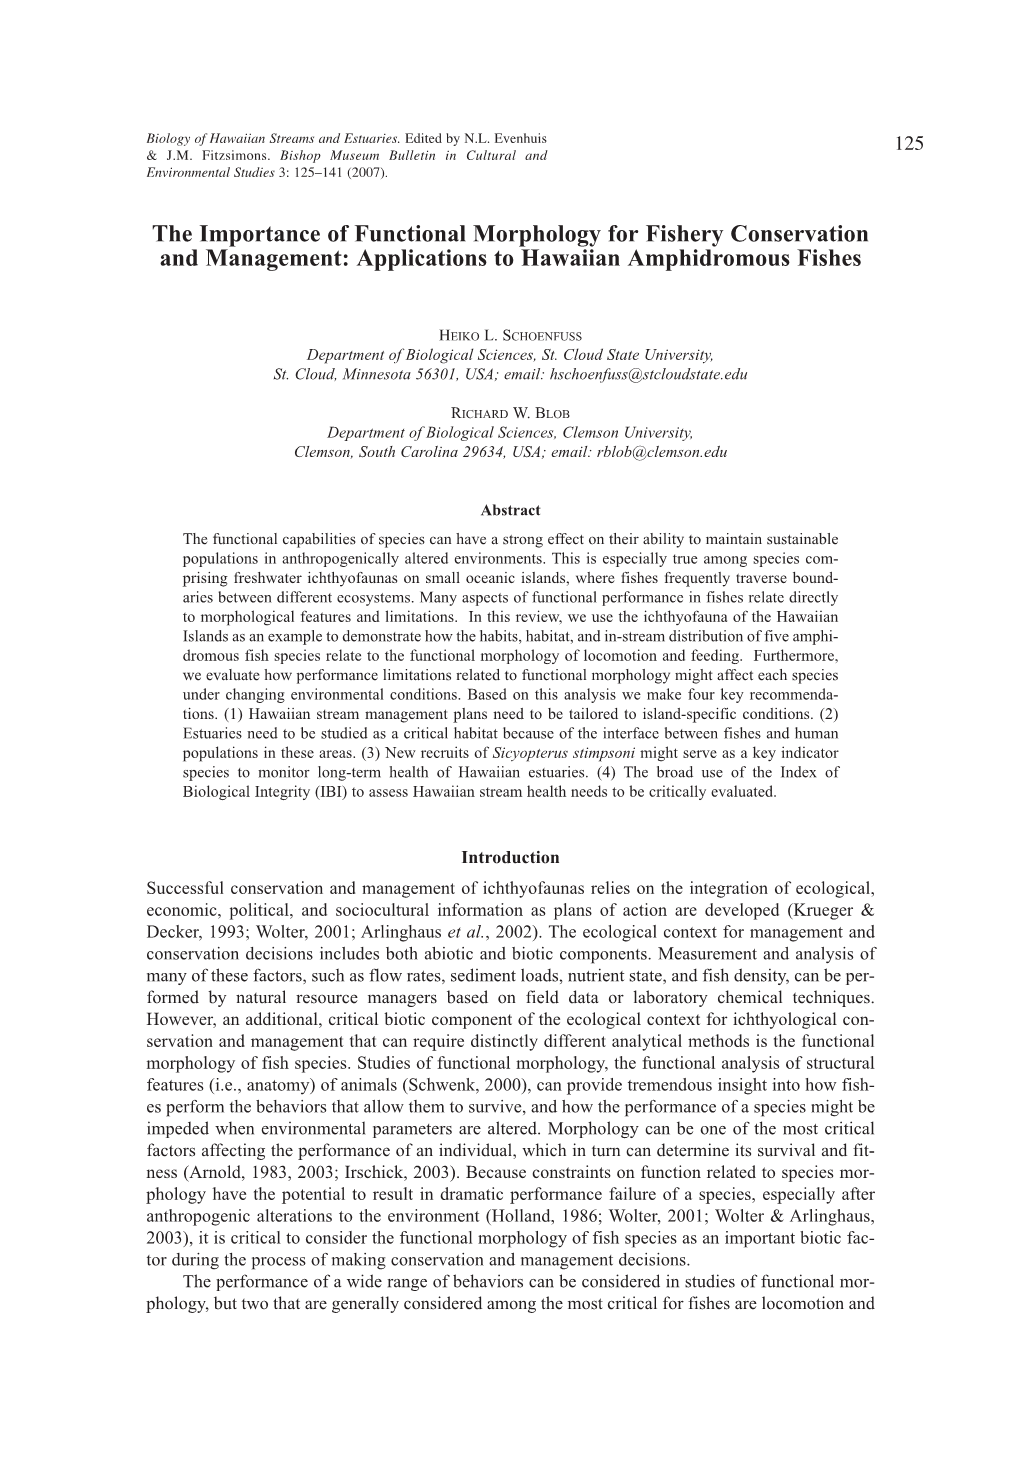 The Importance of Functional Morphology for Fishery Conservation and Management: Applications to Hawaiian Amphidromous Fishes